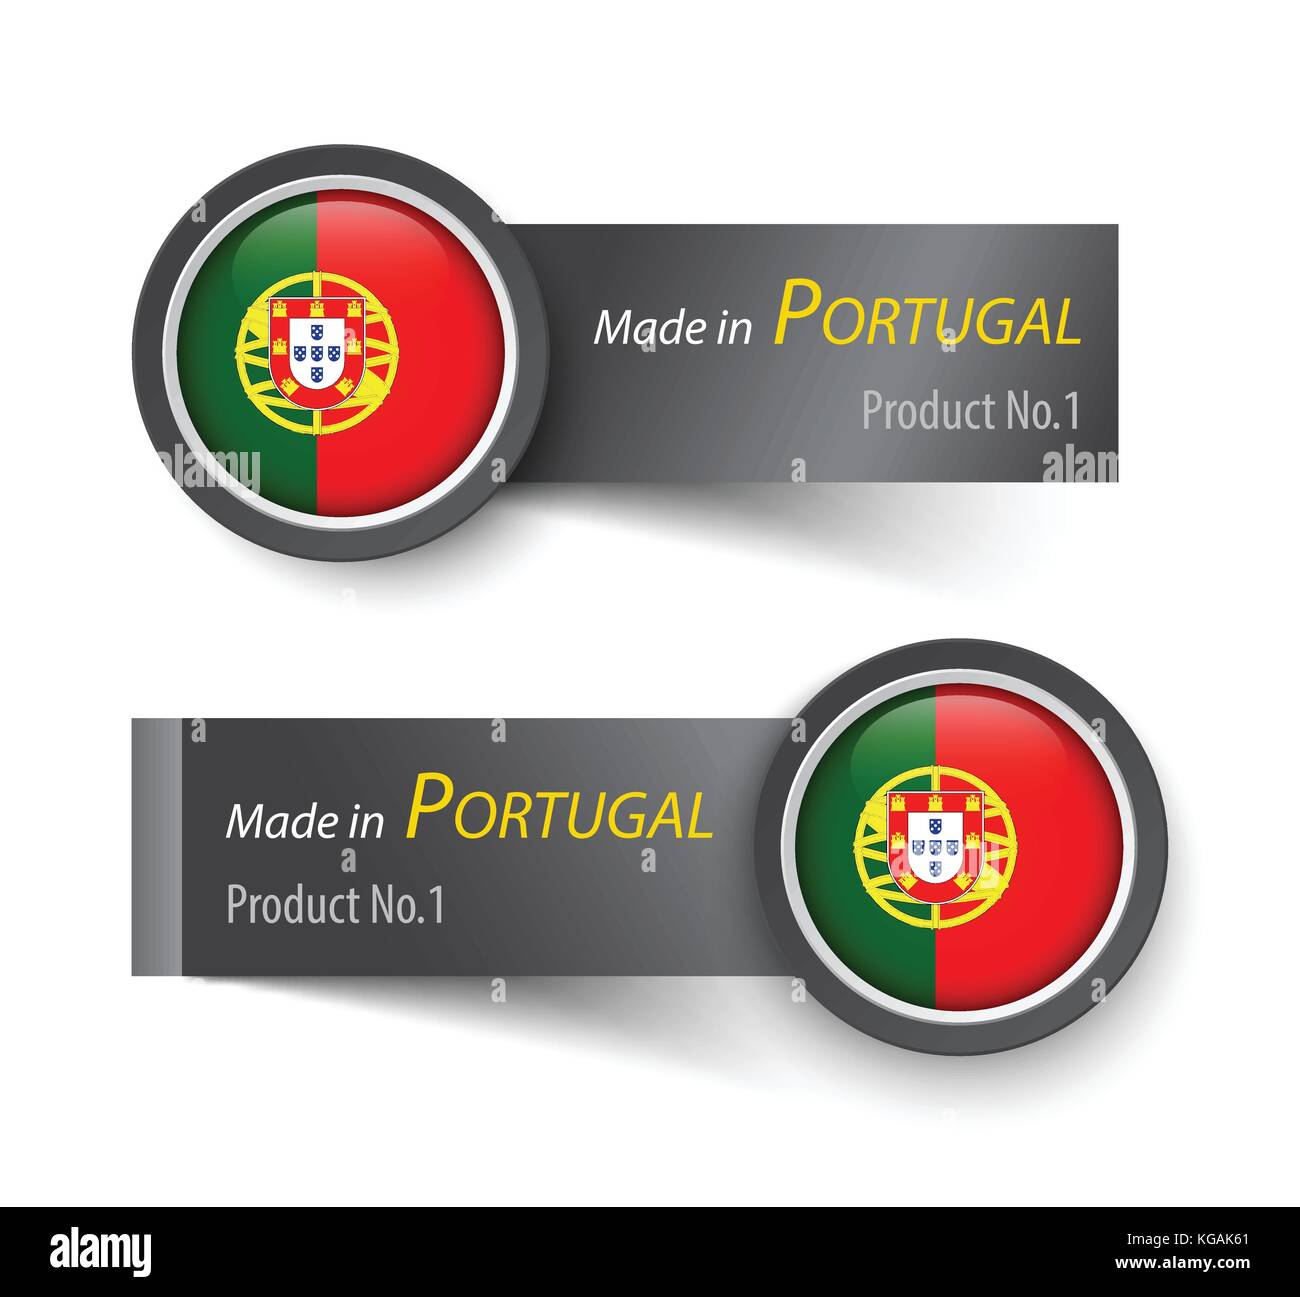 Flag icon and label with text made in Portugal . Stock Vector